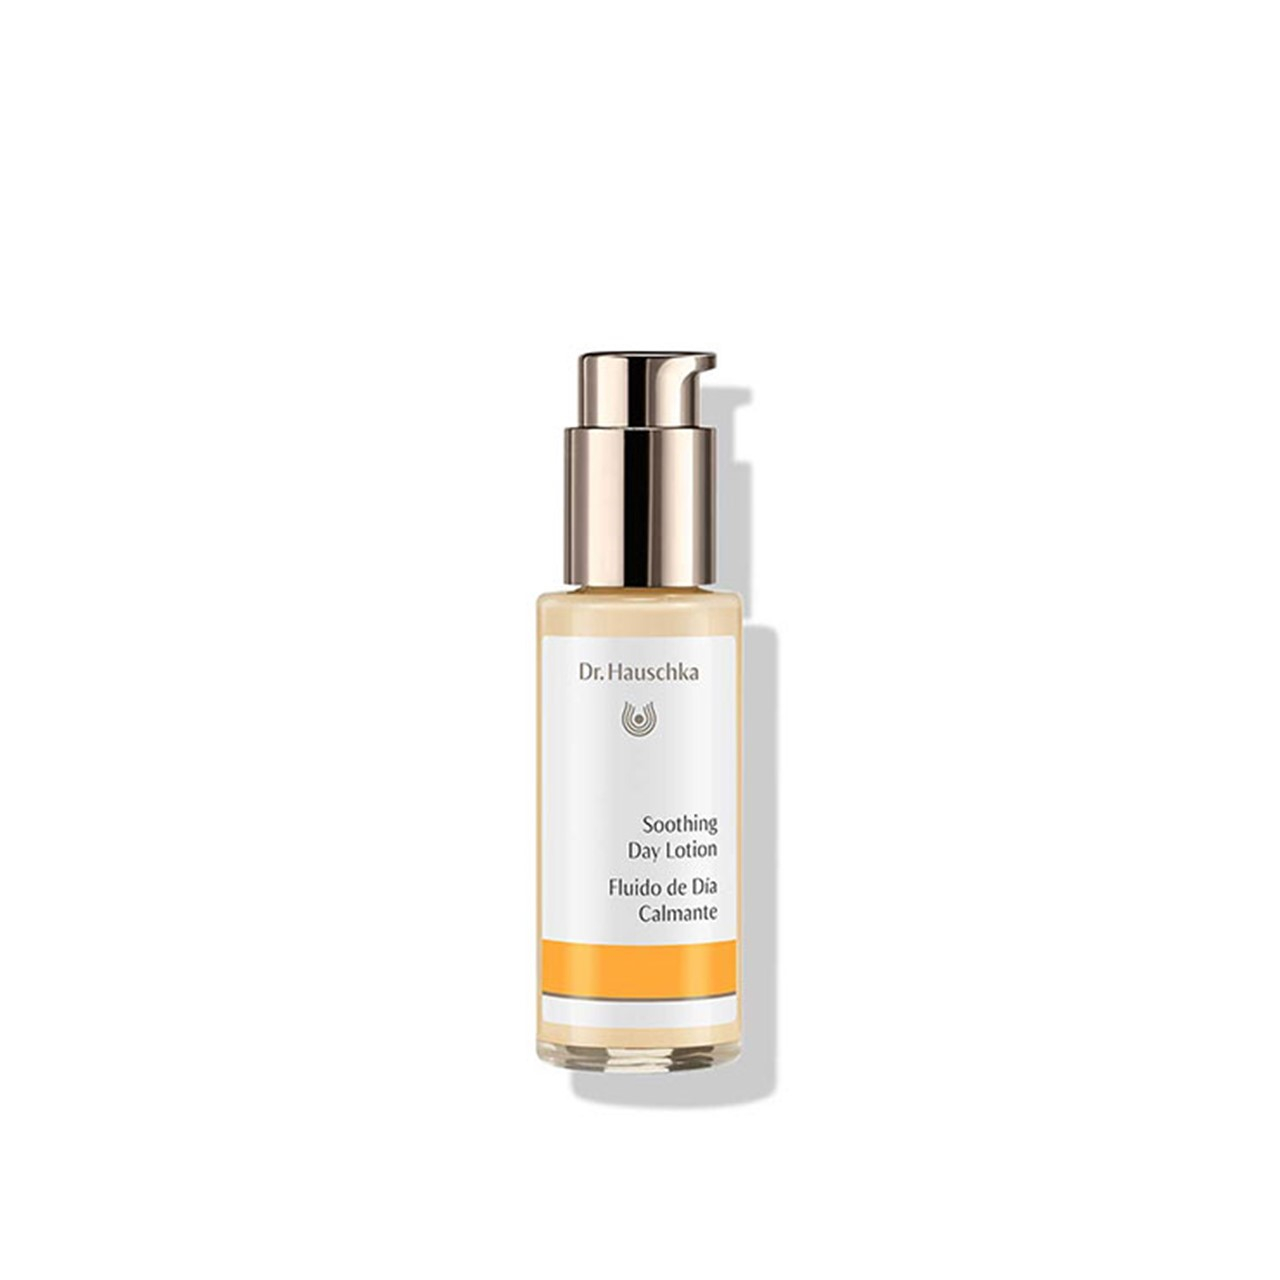 Dr. Hauschka Soothing Day Lotion 50ml (1.69fl oz)